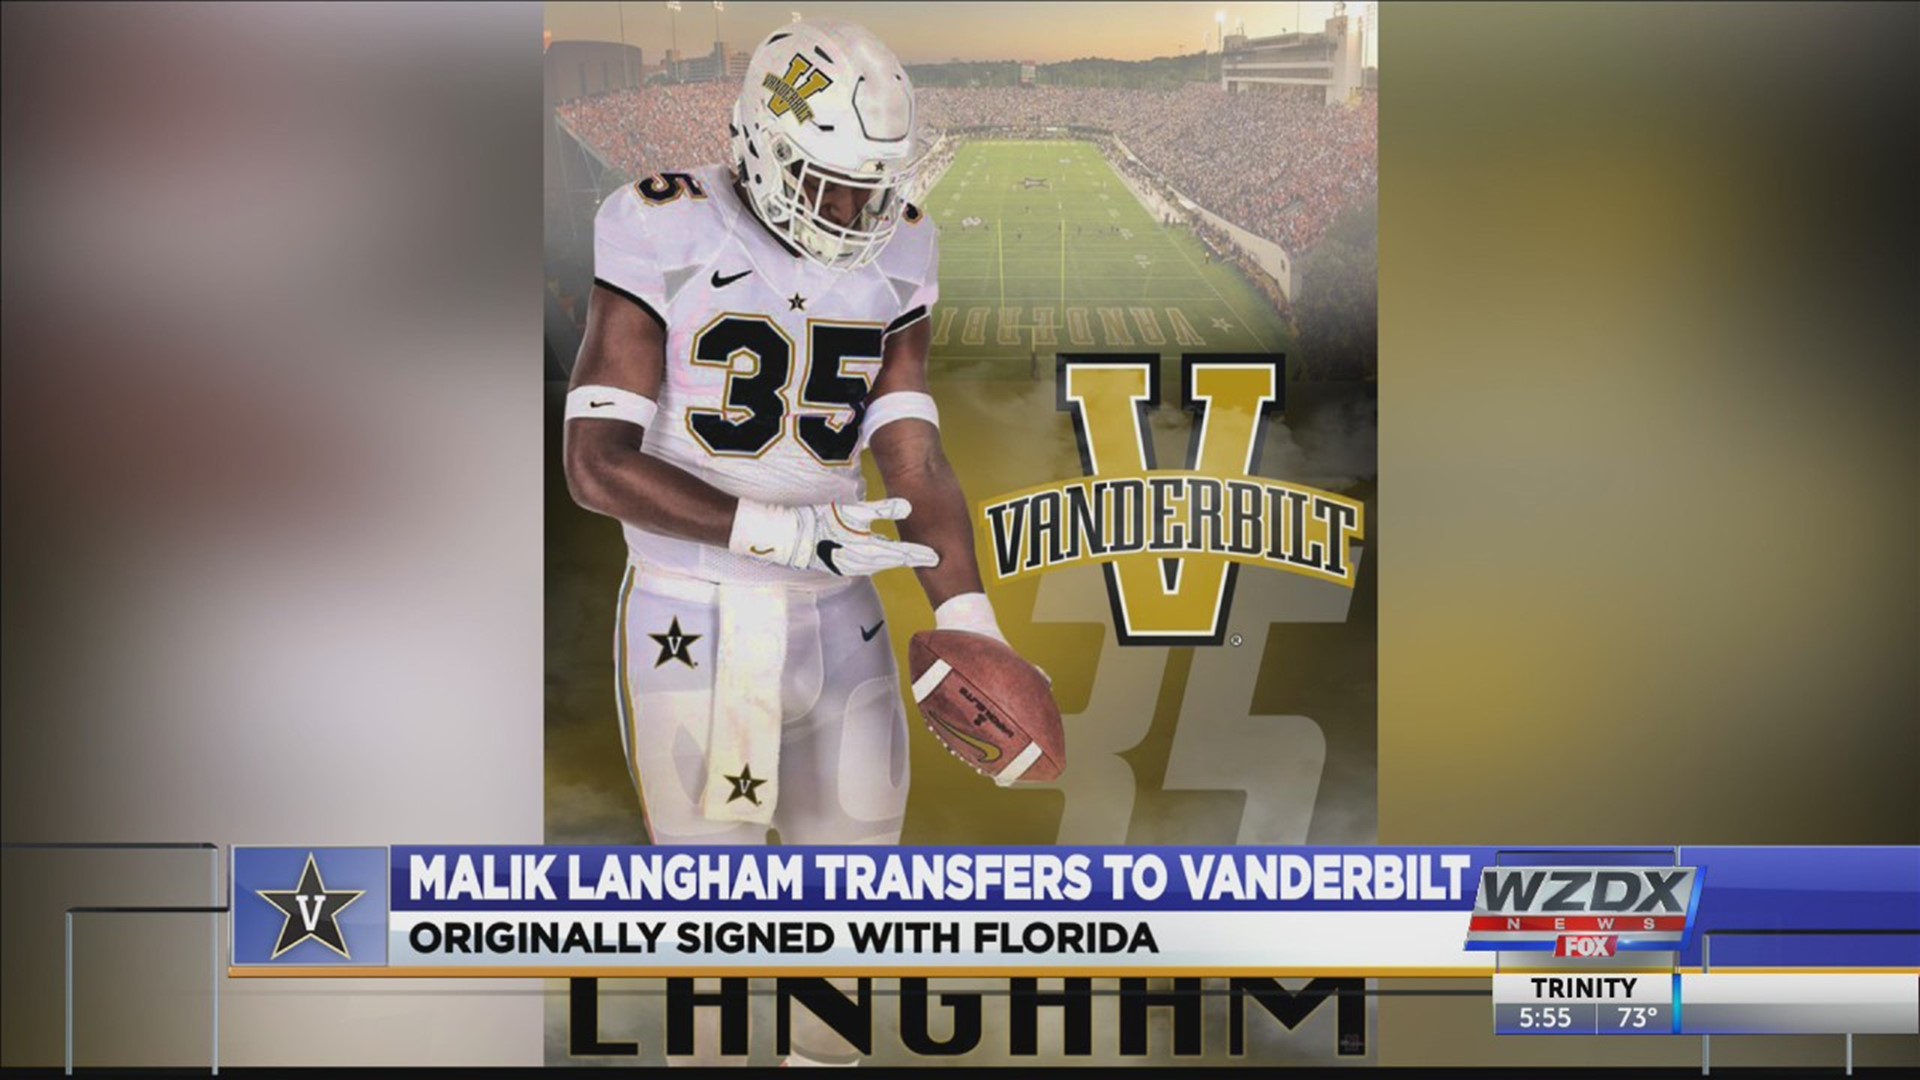 Former Lee High School standout Malik Langham will continue to play football in the SEC. This week, he transferred to Vanderbilt.